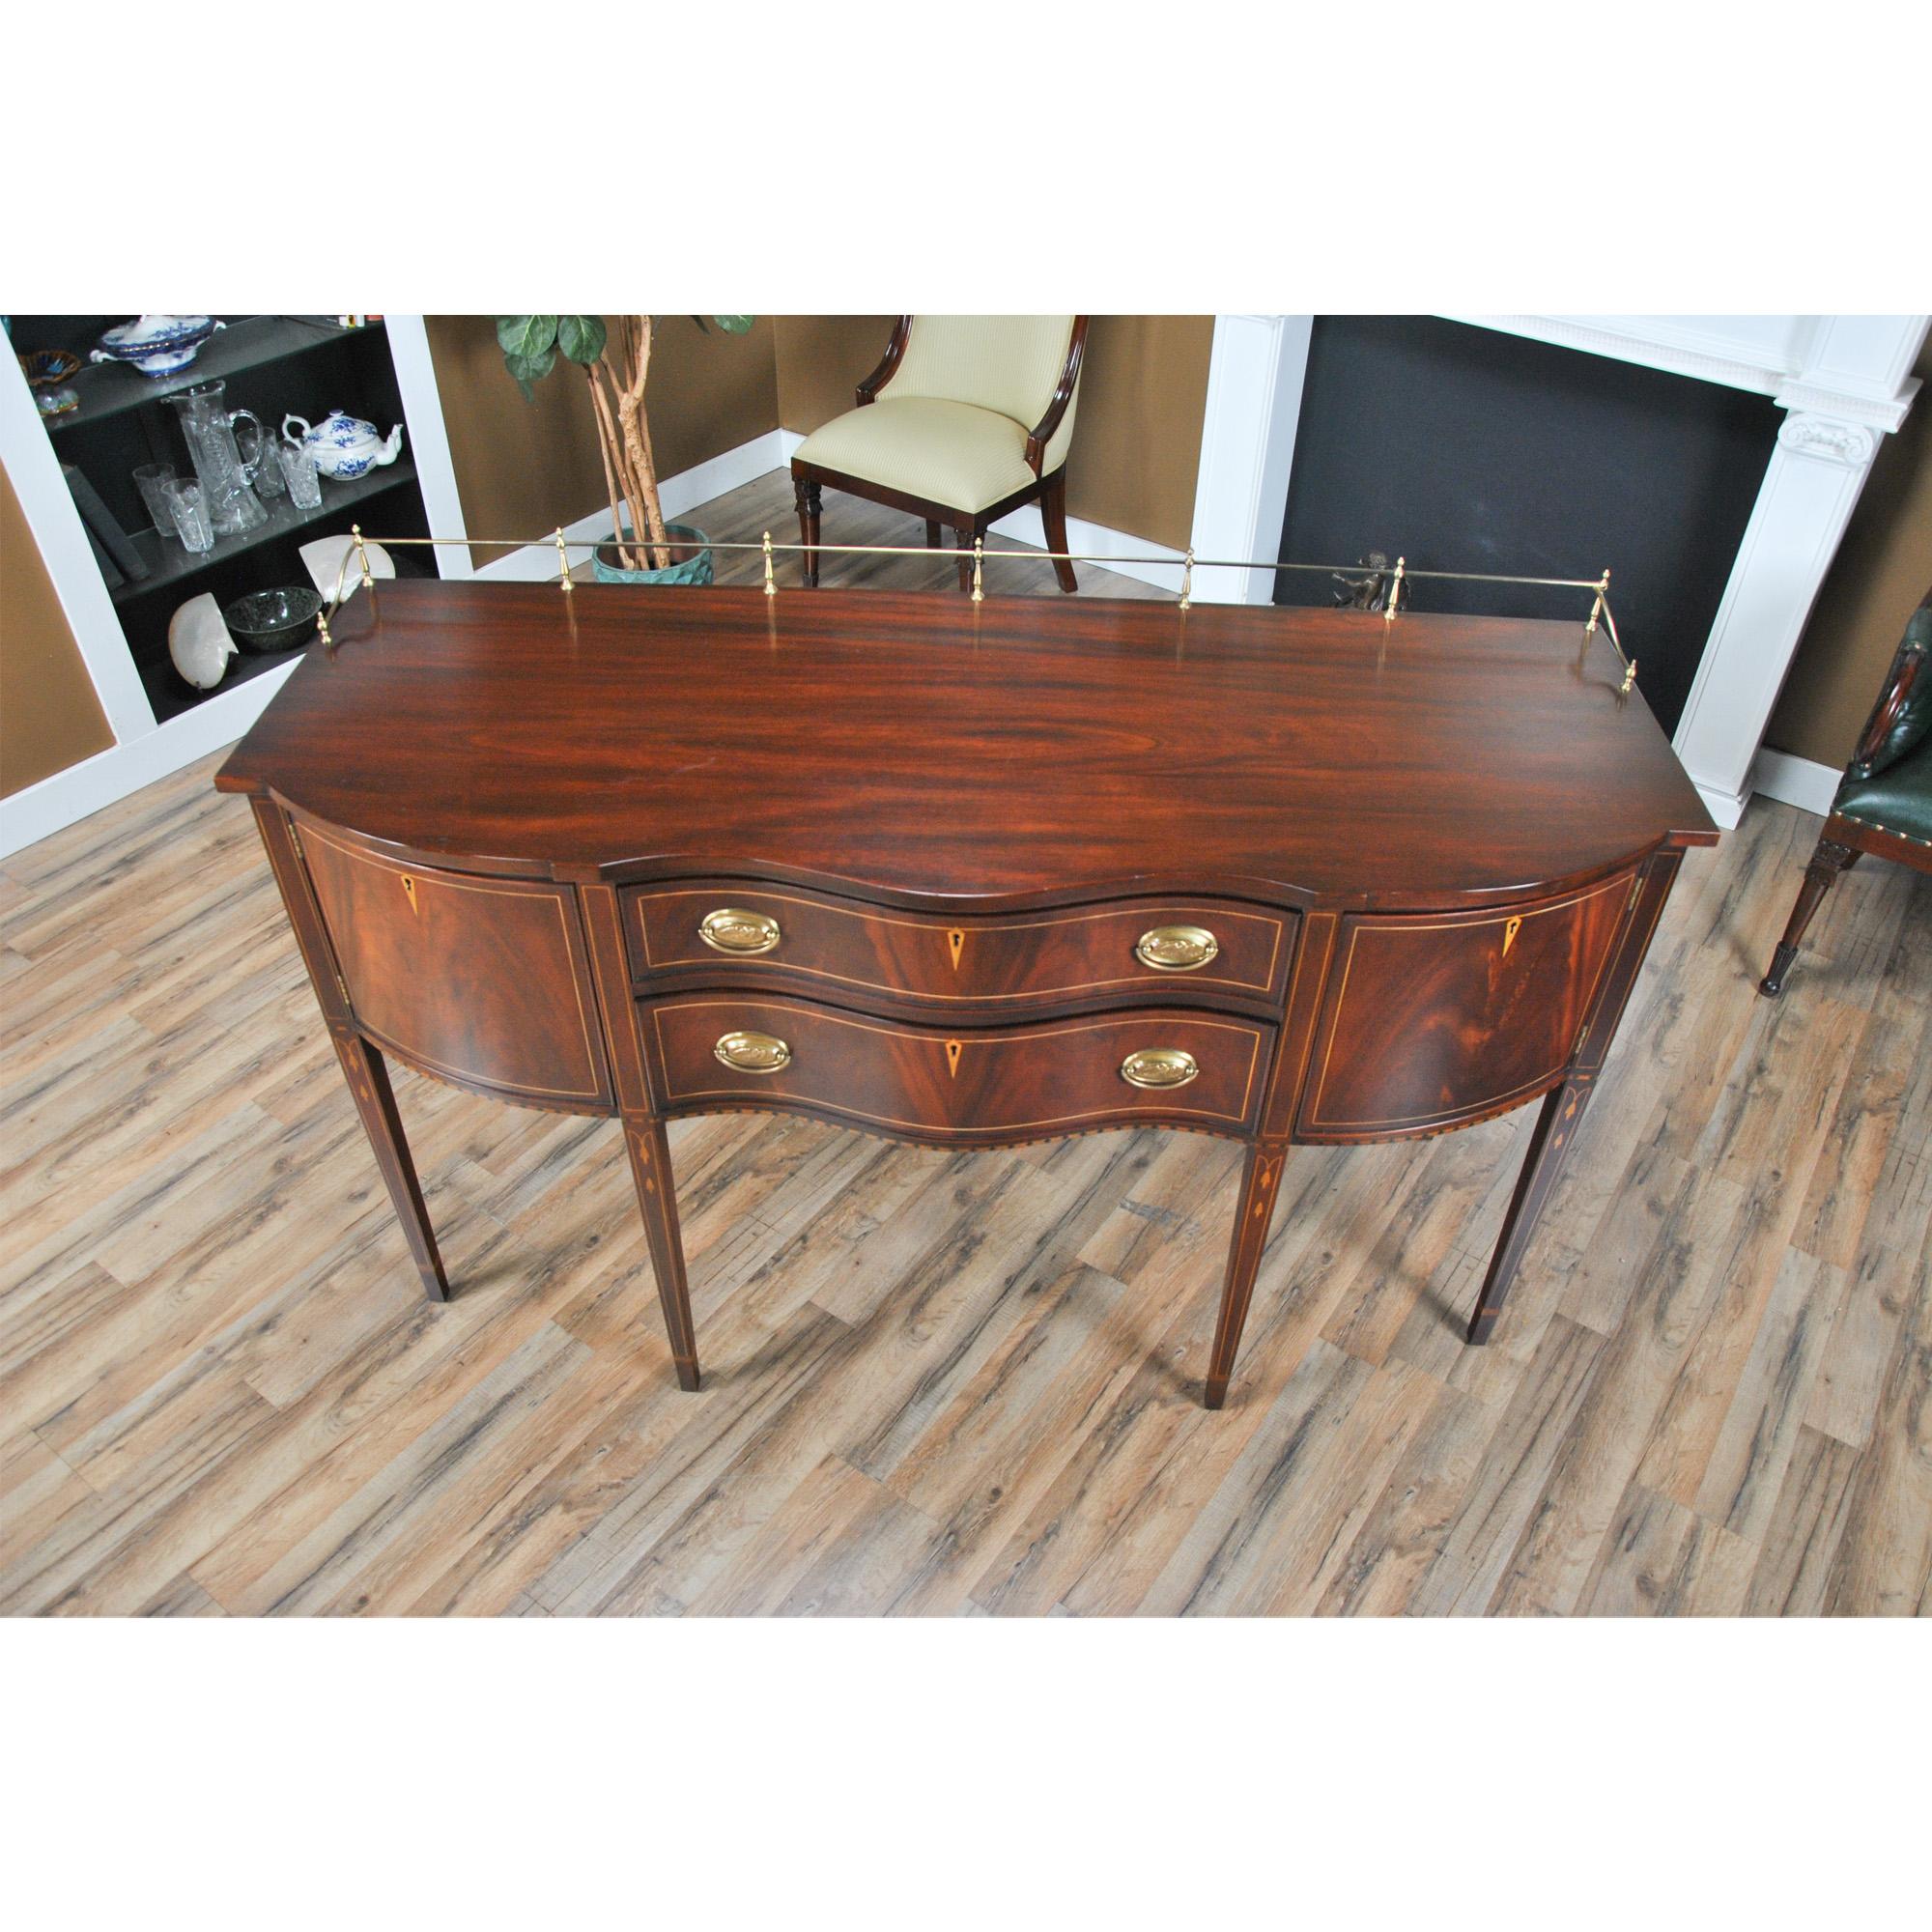 A vintage Henkel Harris sideboard in excellent original, as found, condition.

Simple yet sophisticated this beautiful Henkel Harris Sideboard has everything going for it. A slightly deeper size than many other high leg sideboards this item boasts